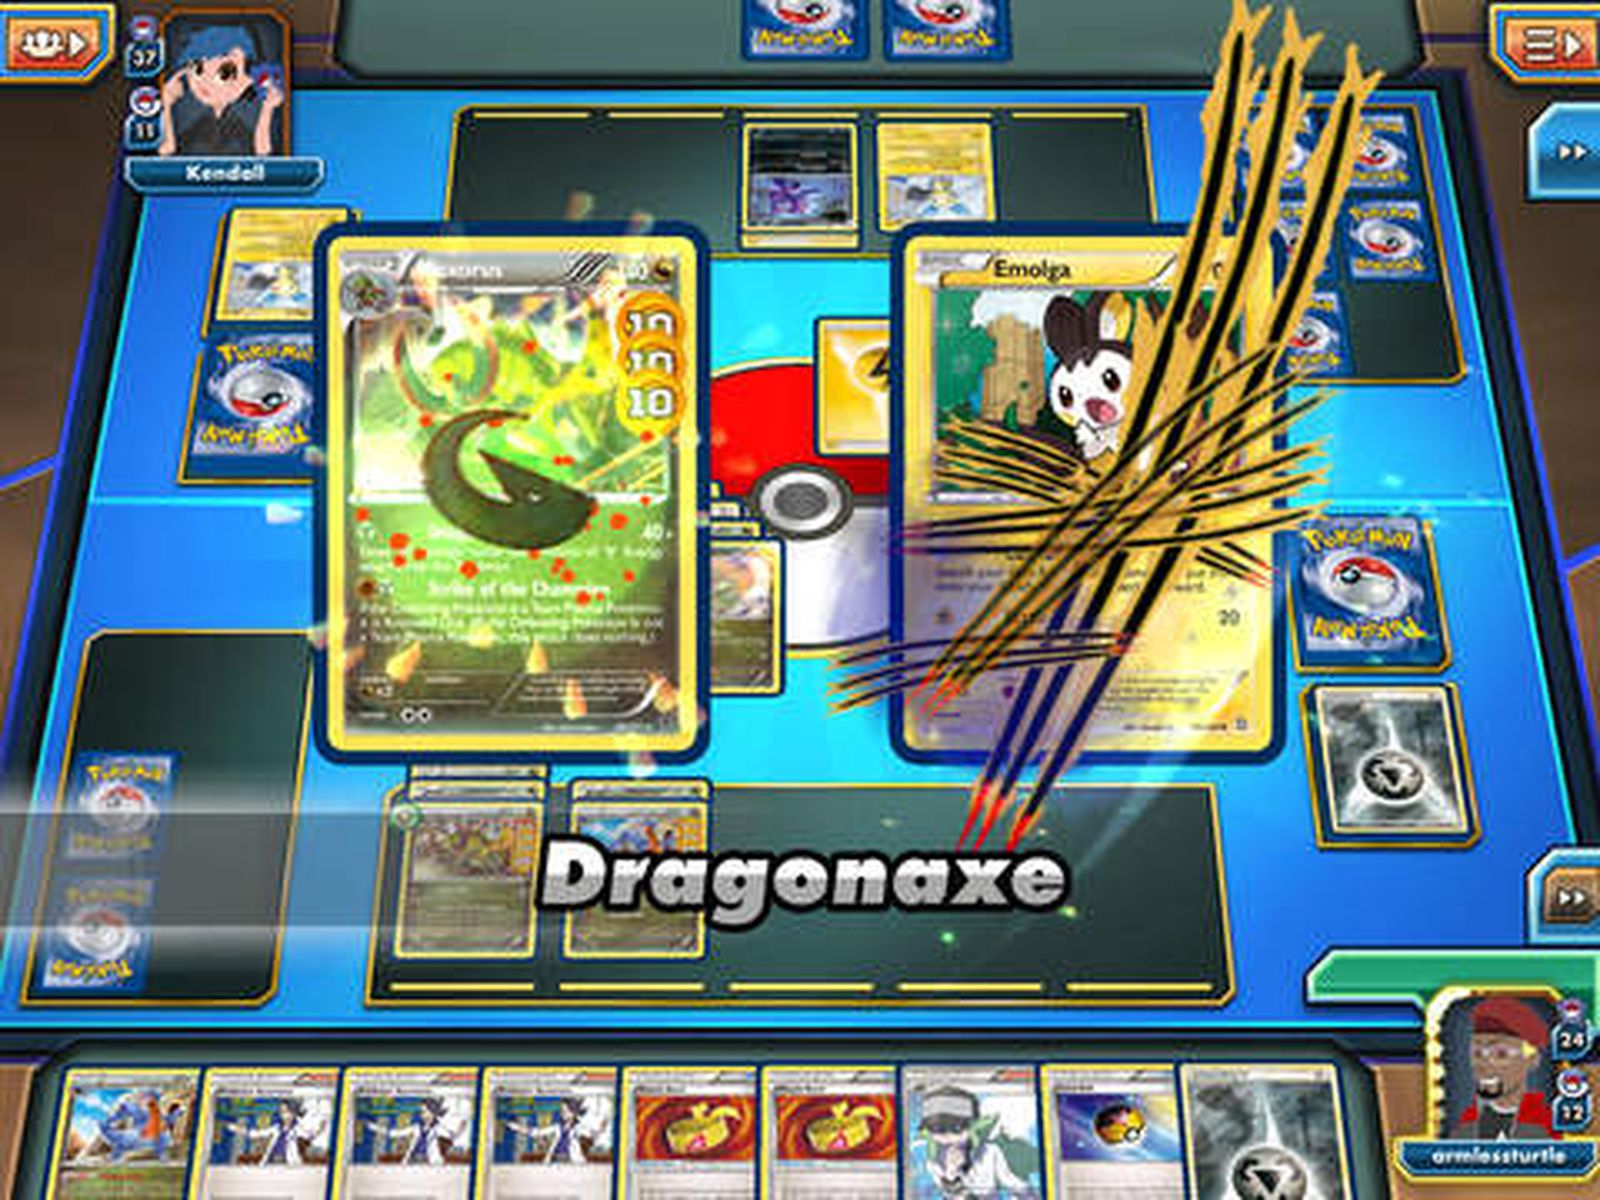 Pokémon Trading Card Game Released for iPad in U.S. Free to